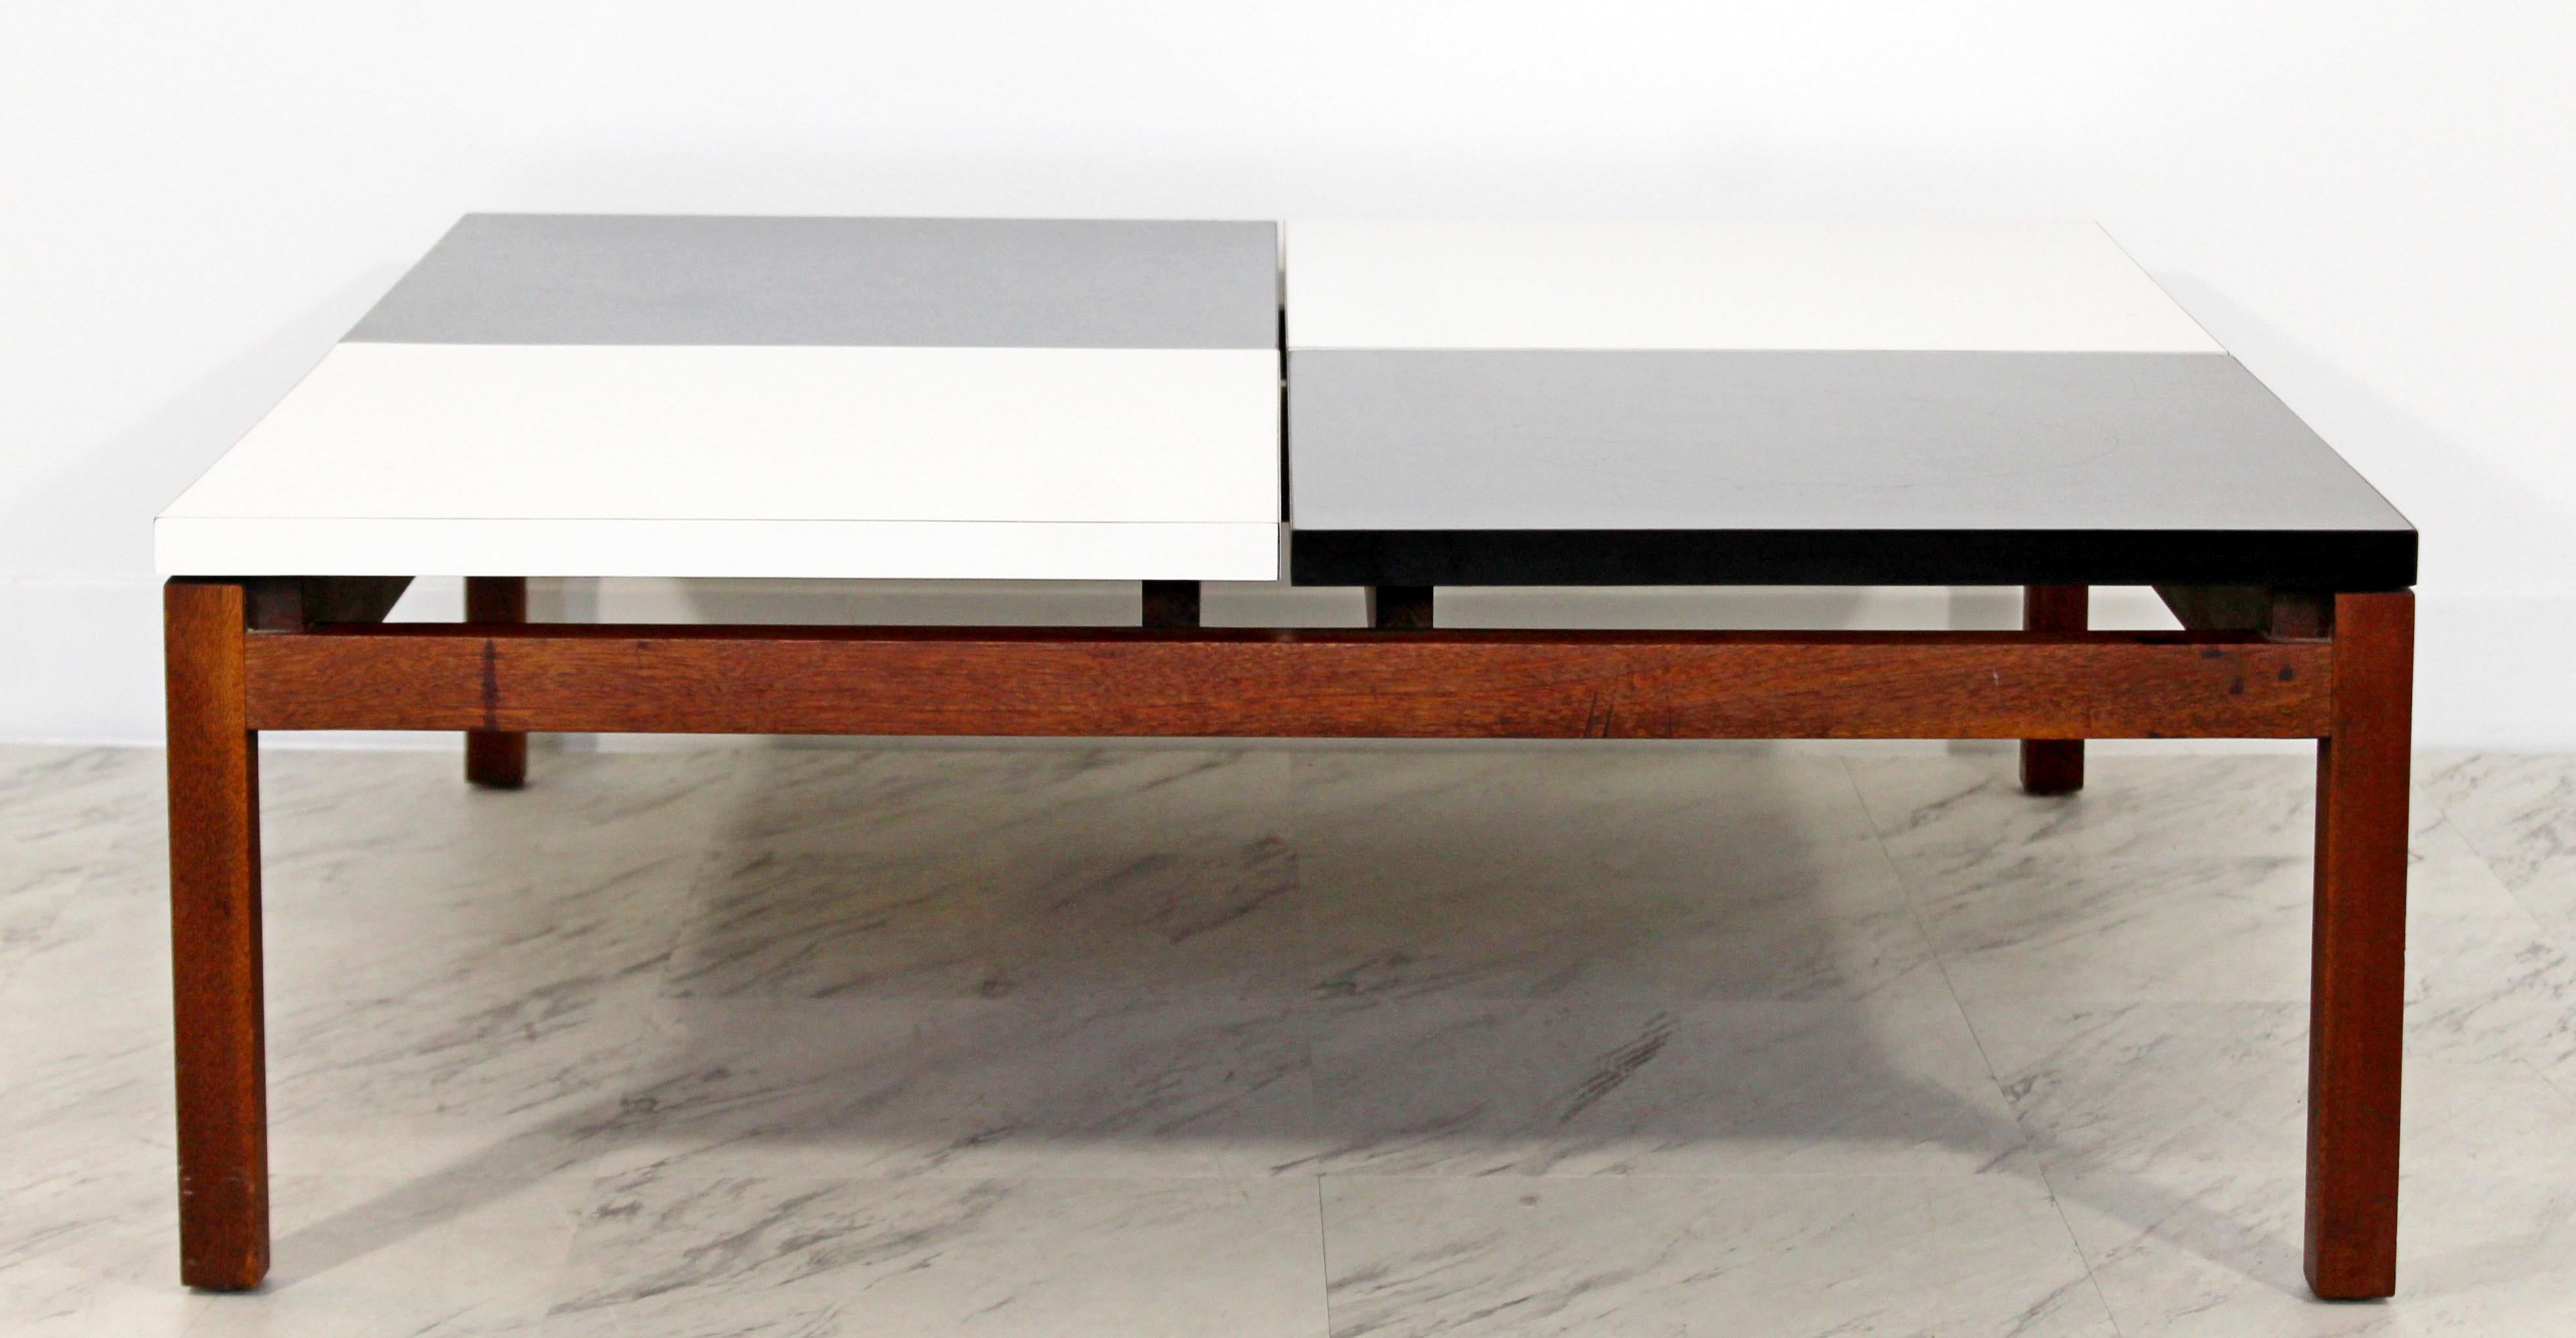 American Mid-Century Modern Black White on Wood Coffee Table by Lewis Butler Knoll 1960s